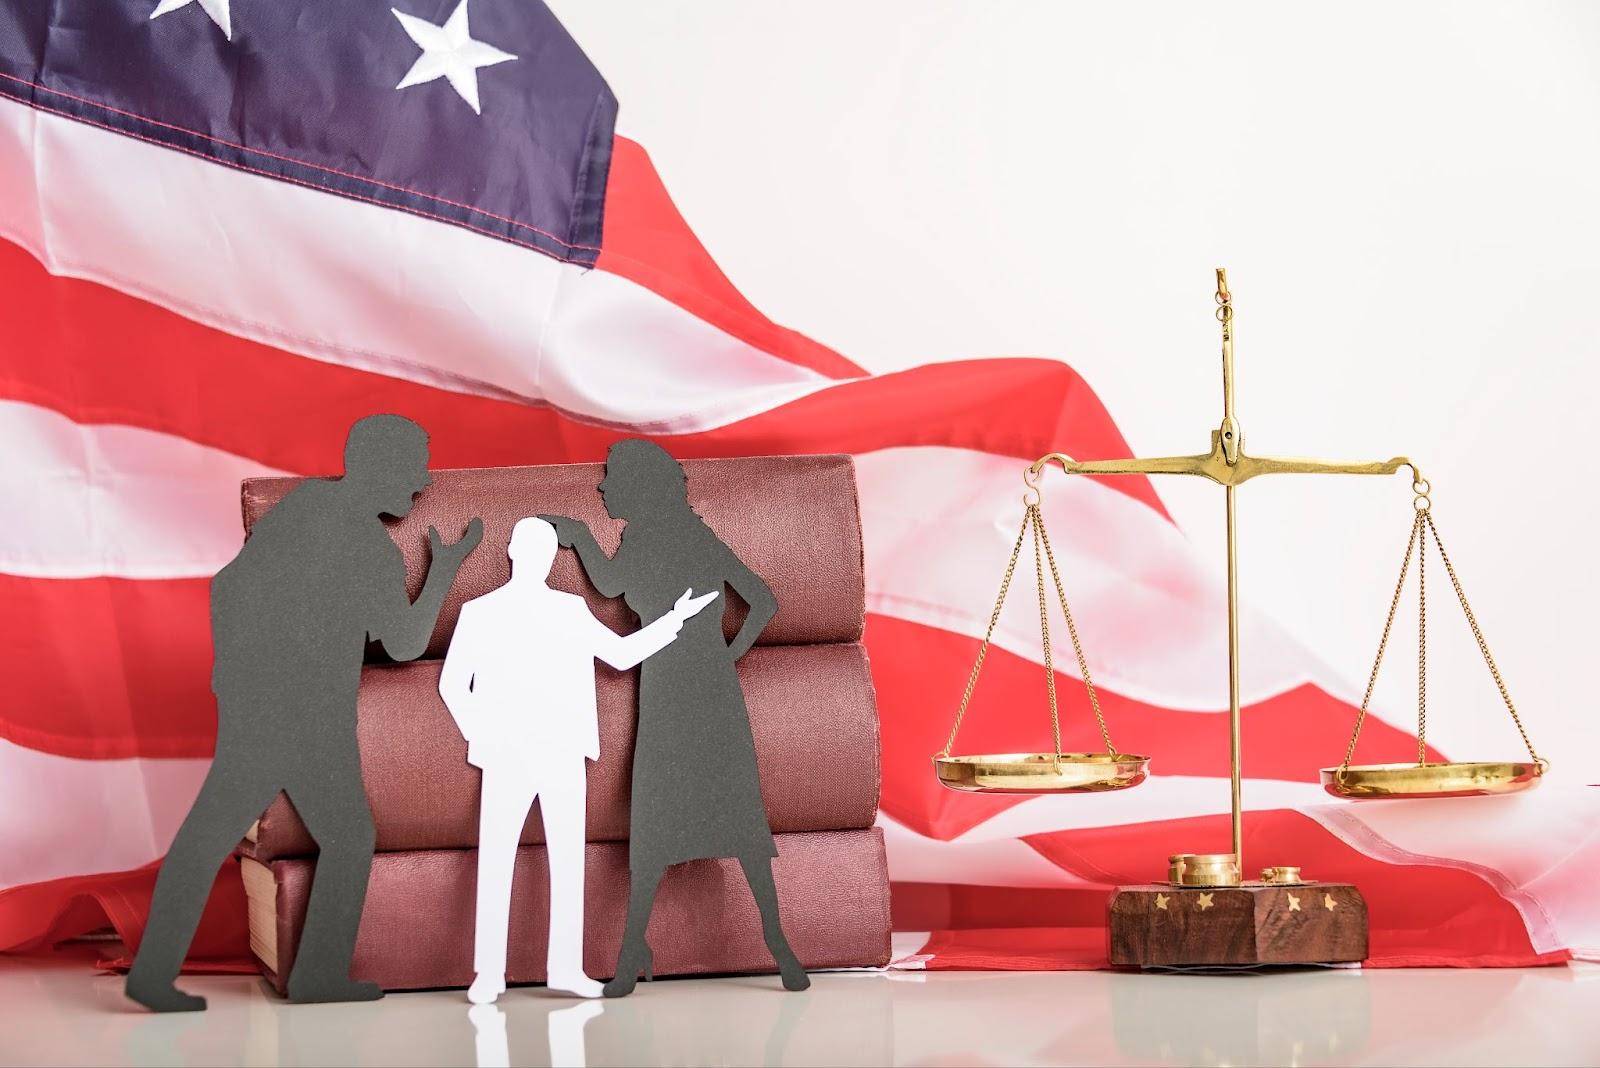 Silhouettes of three people arguing in front of an American flag, with scales of justice and legal books present, possibly depicting a scene involving a divorce attorney in Dallas, TX.